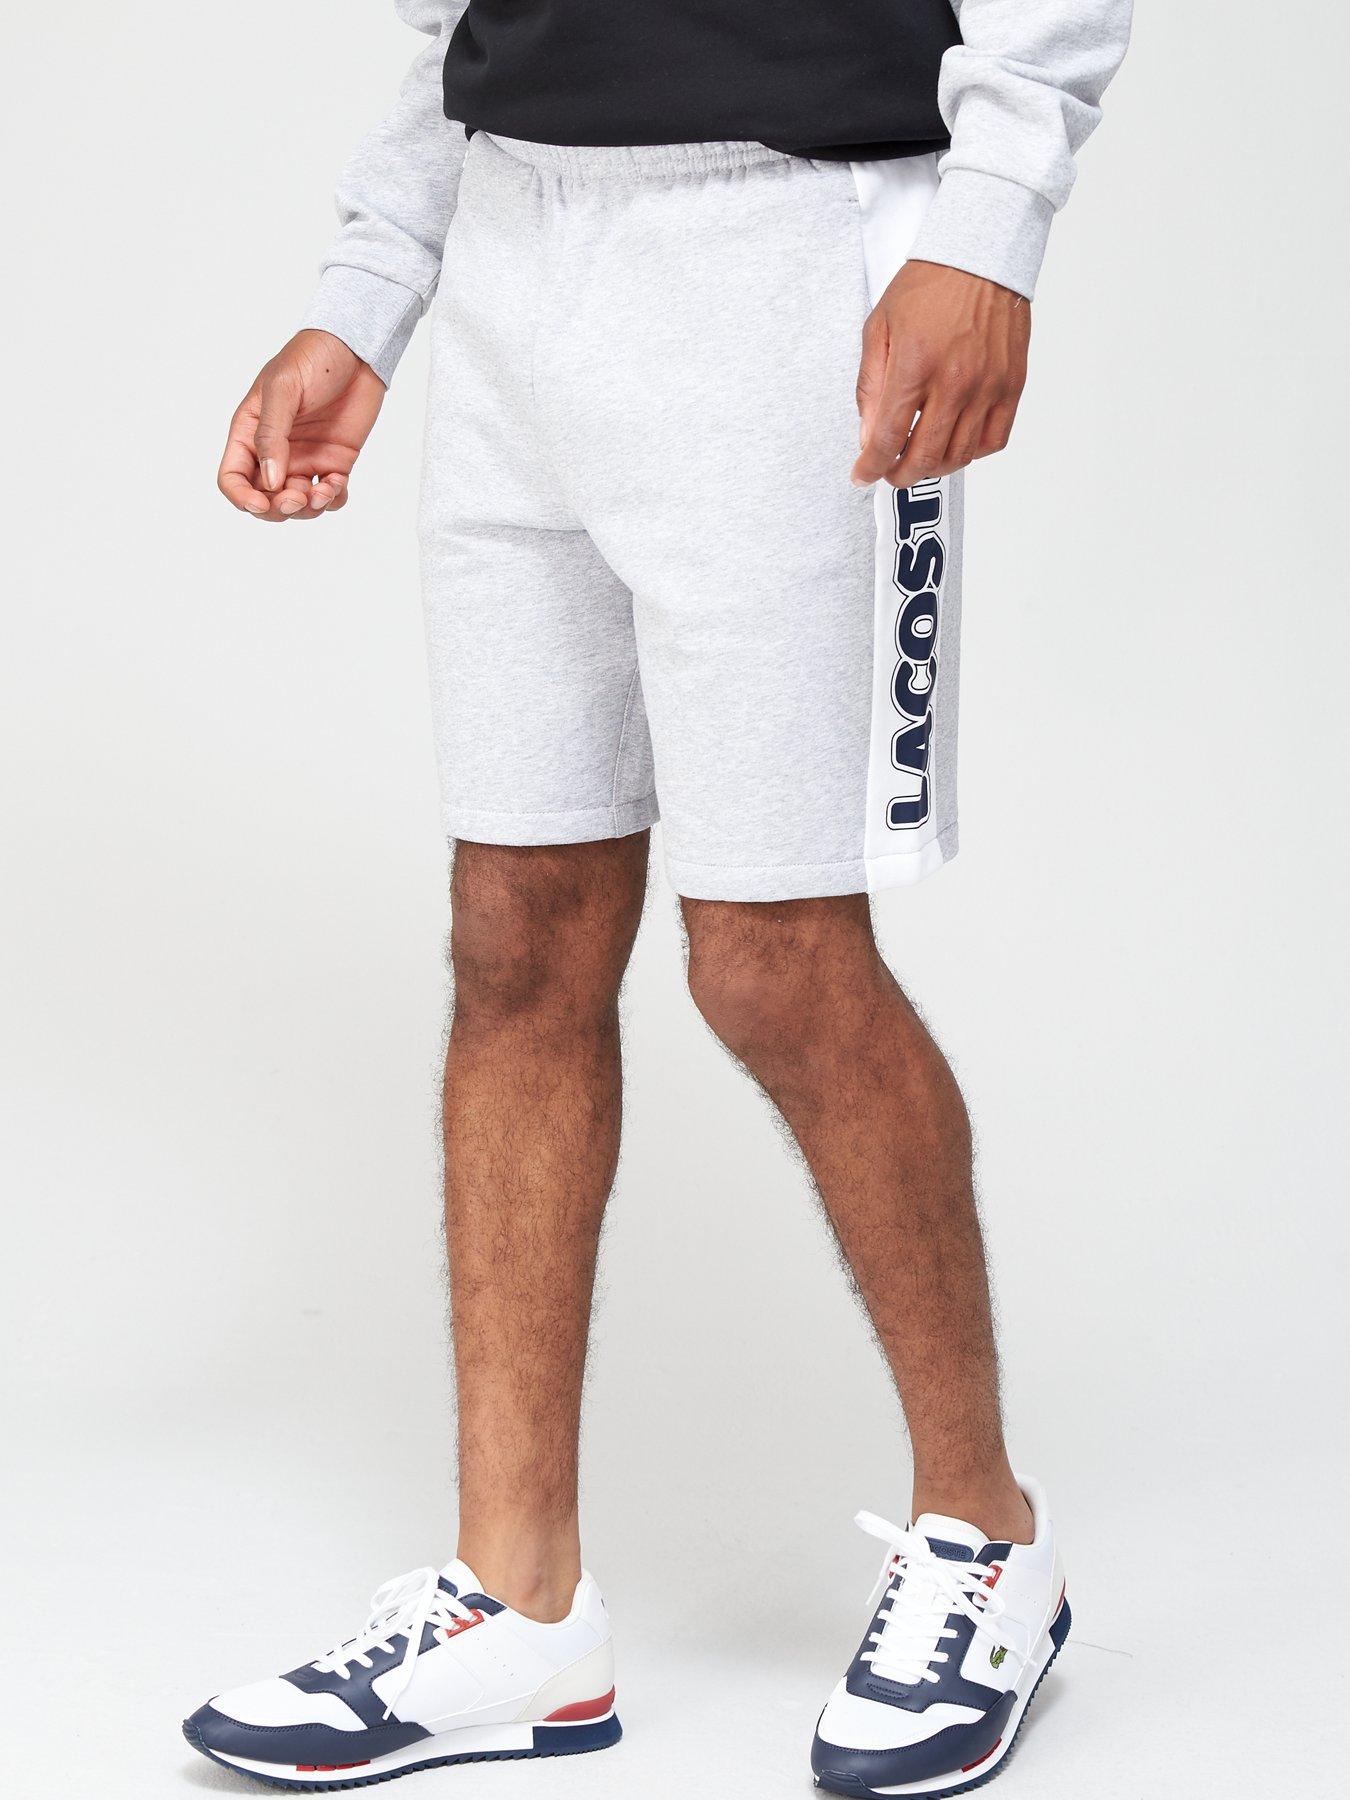 lacoste jogger shorts, OFF 72%,Buy!